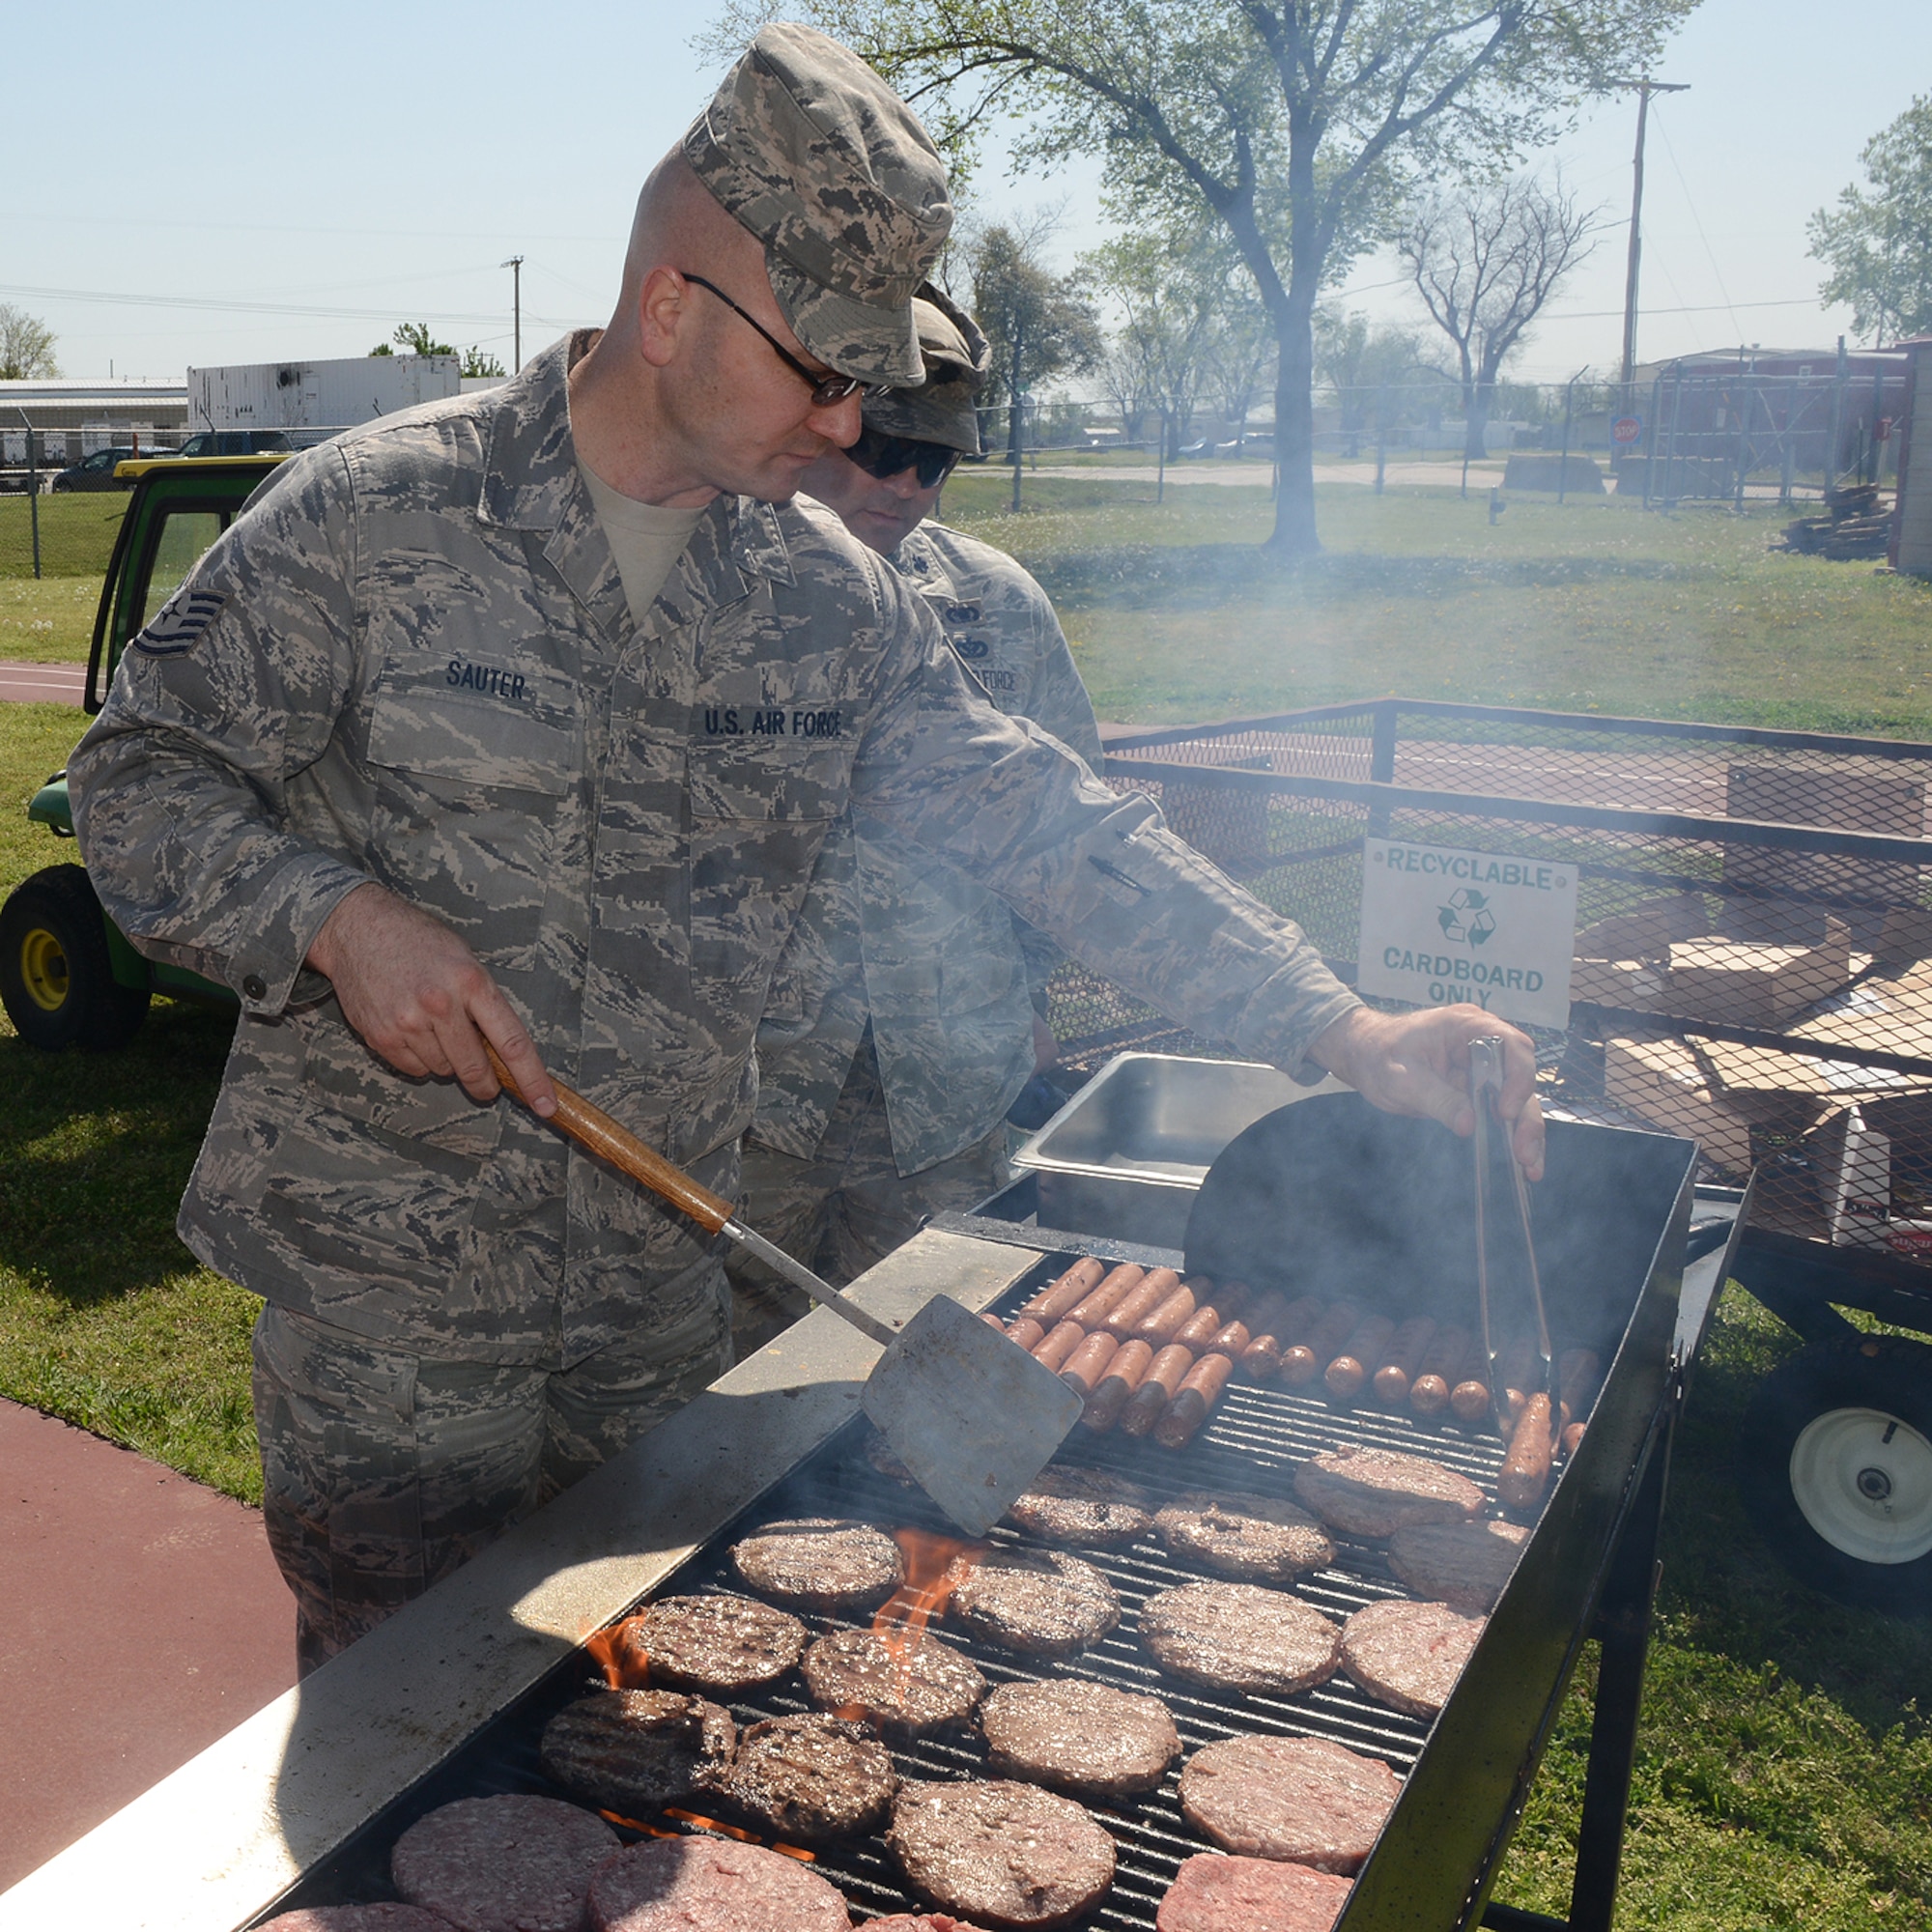 Technical Sergeant Michael Sauter, 138th Communications Flight,  cooks hamburgers in preparation for Earth Day celebration at the 138th Fighter Wing, 22 April 2014.  The 138th FW Environmental Management office organized a cookout and other green activities to celebrate the day at the Tulsa Air National Guard base, Tulsa Okla.  (U.S. National Guard photo by Senior Master Sgt.  Preston L. Chasteen/Released)